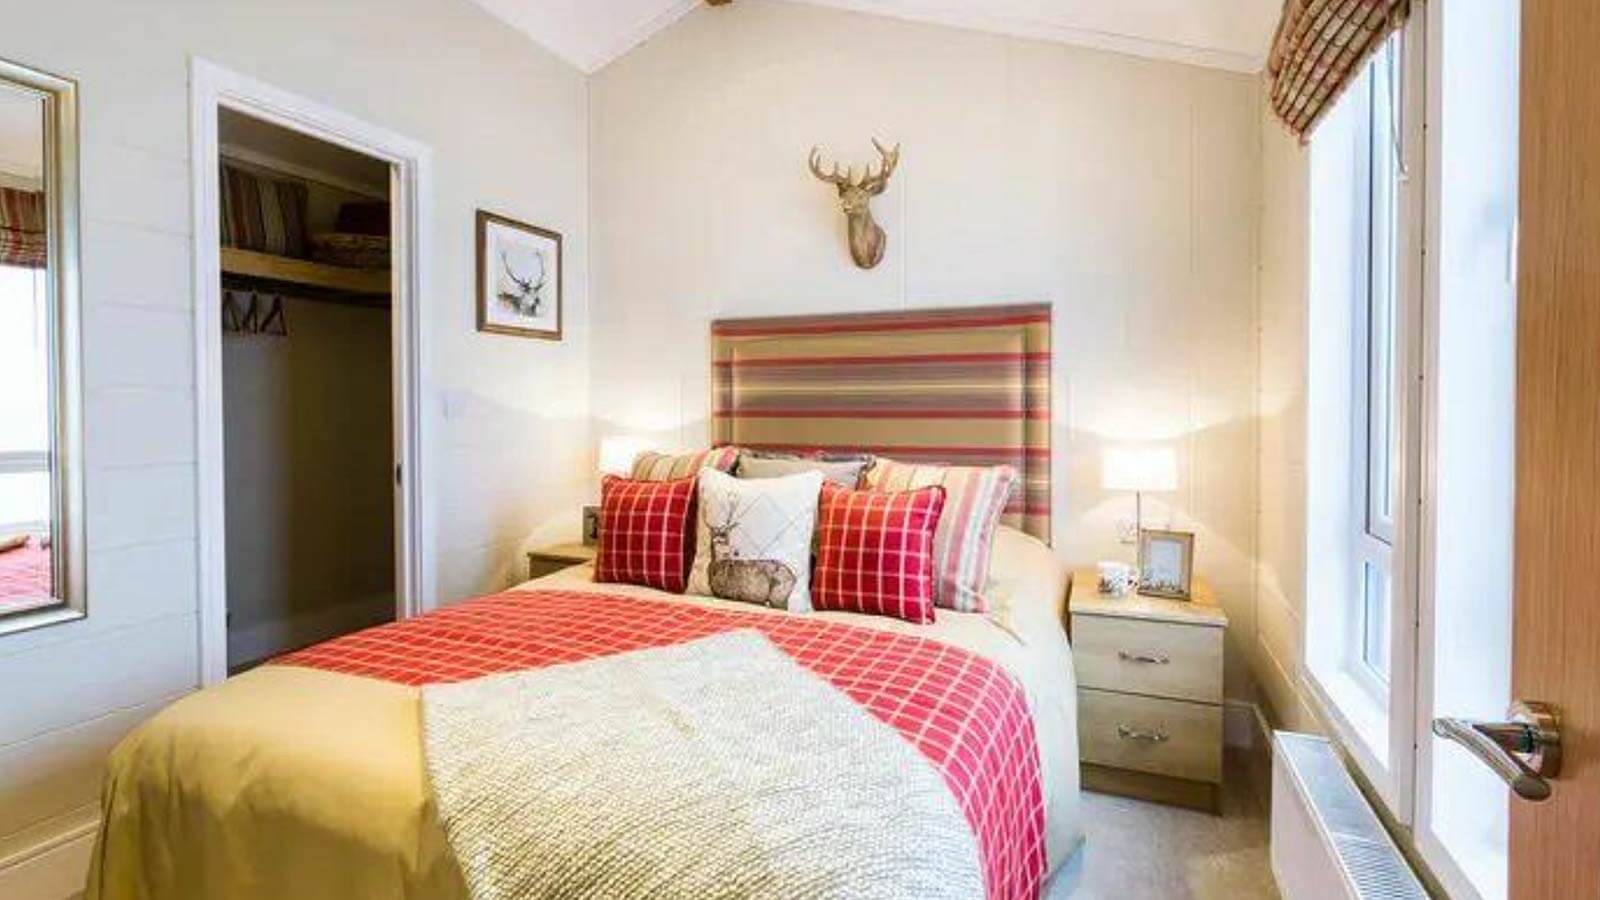   £150,000 UK Holiday Lodge: You choose the location!